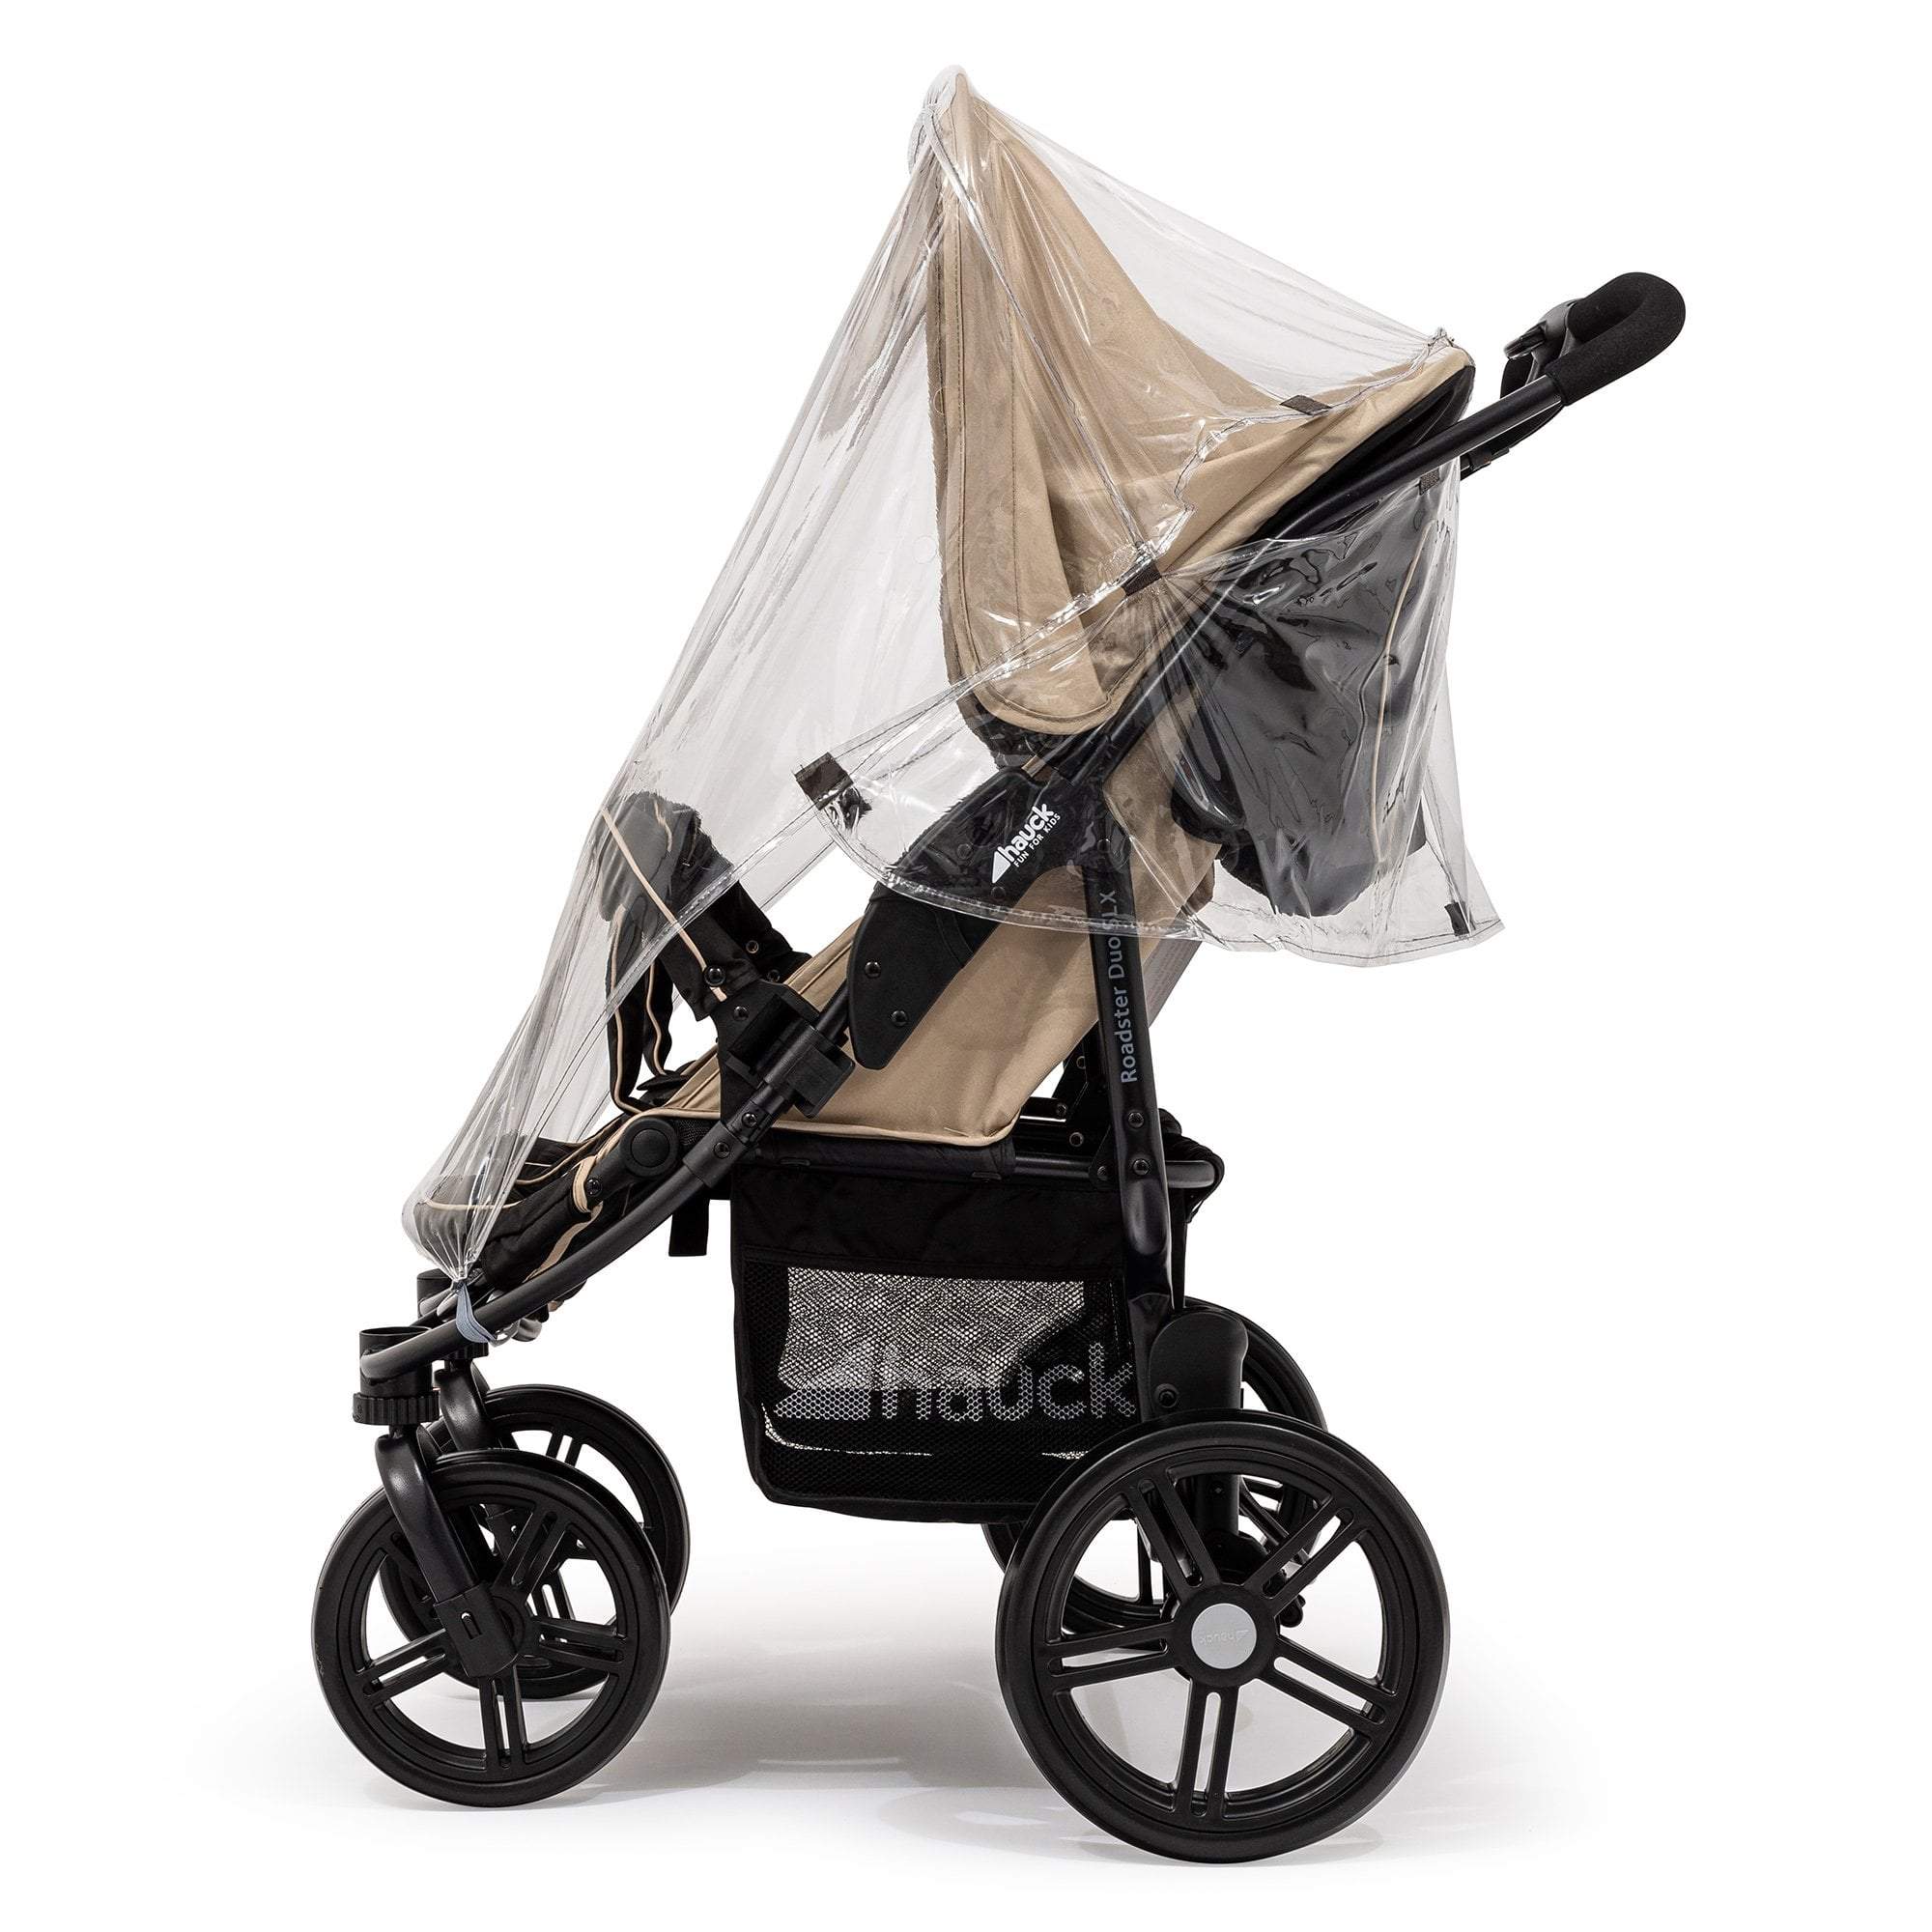 Side by Side Raincover Compatible with Baby Jogger - For Your Little One